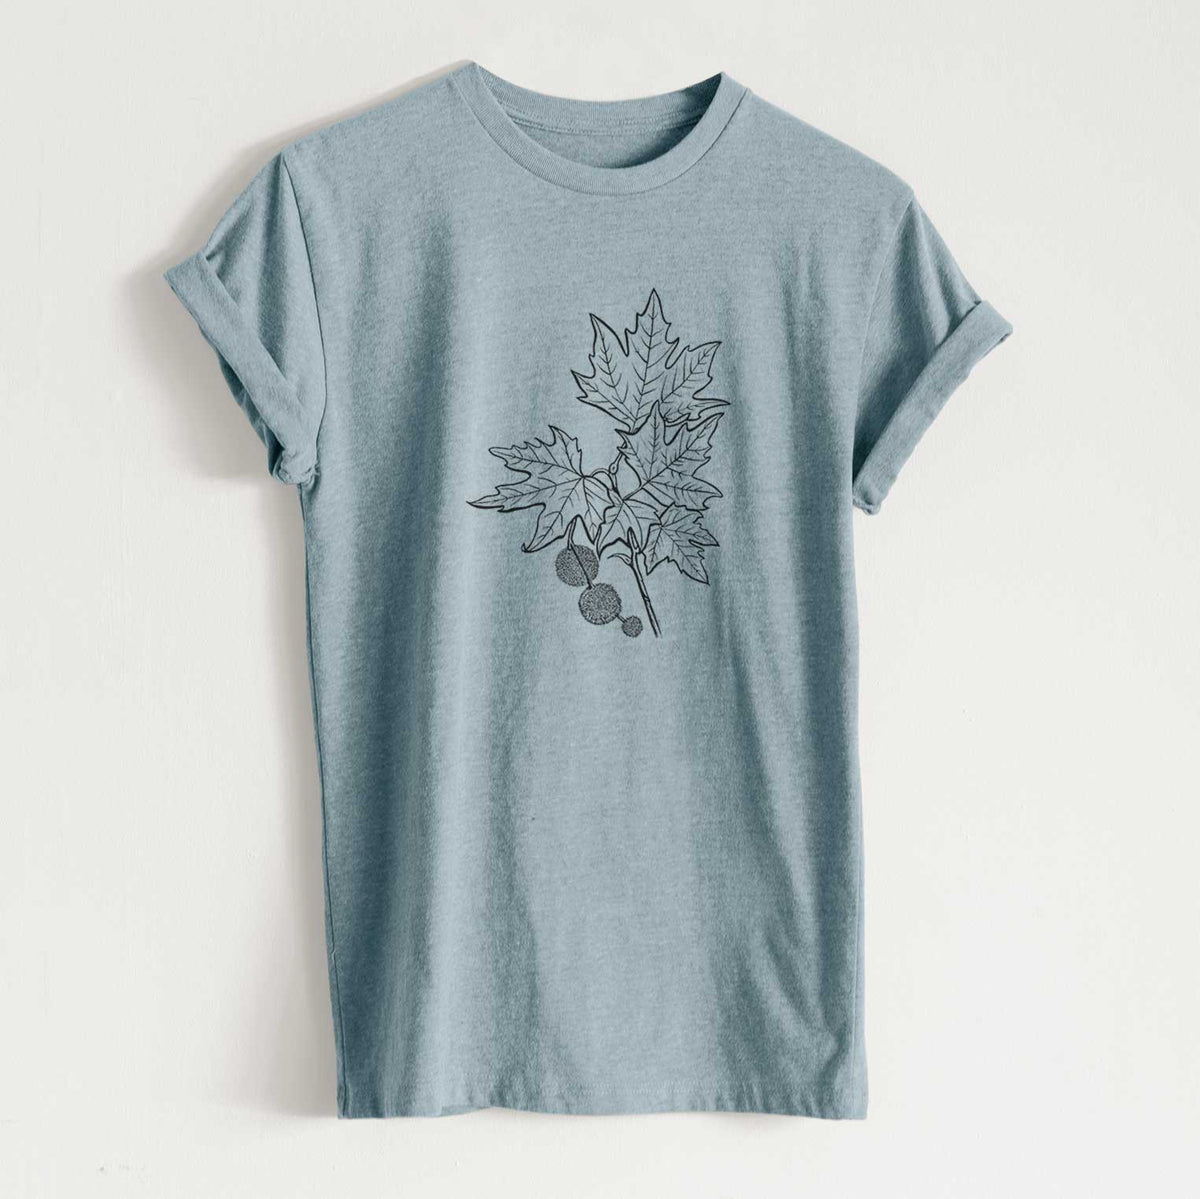 Platanus Orientalis - Oriental Plane Tree Stem with Leaves - Unisex Recycled Eco Tee  - CLOSEOUT - FINAL SALE